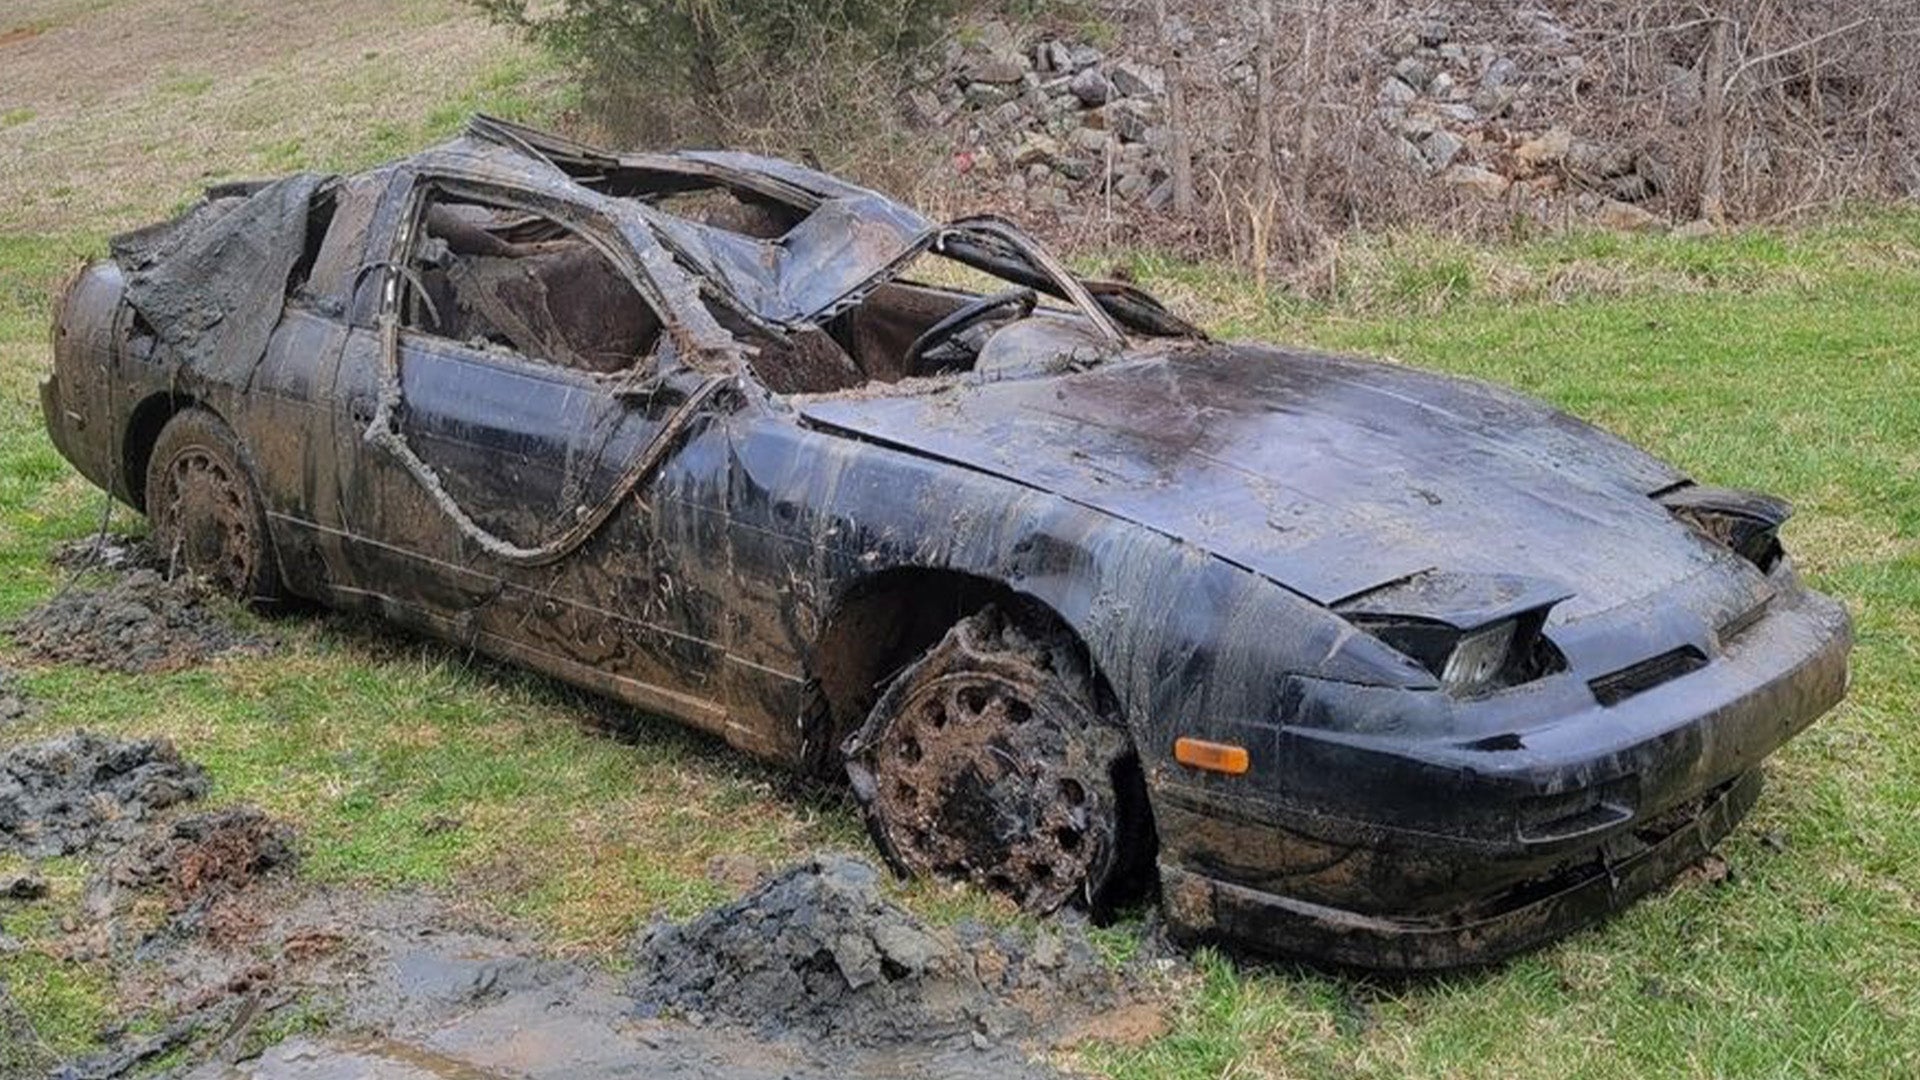 After 32 years submerged in a lake, the stolen Nissan 240SX remains in drivable condition for drifting.